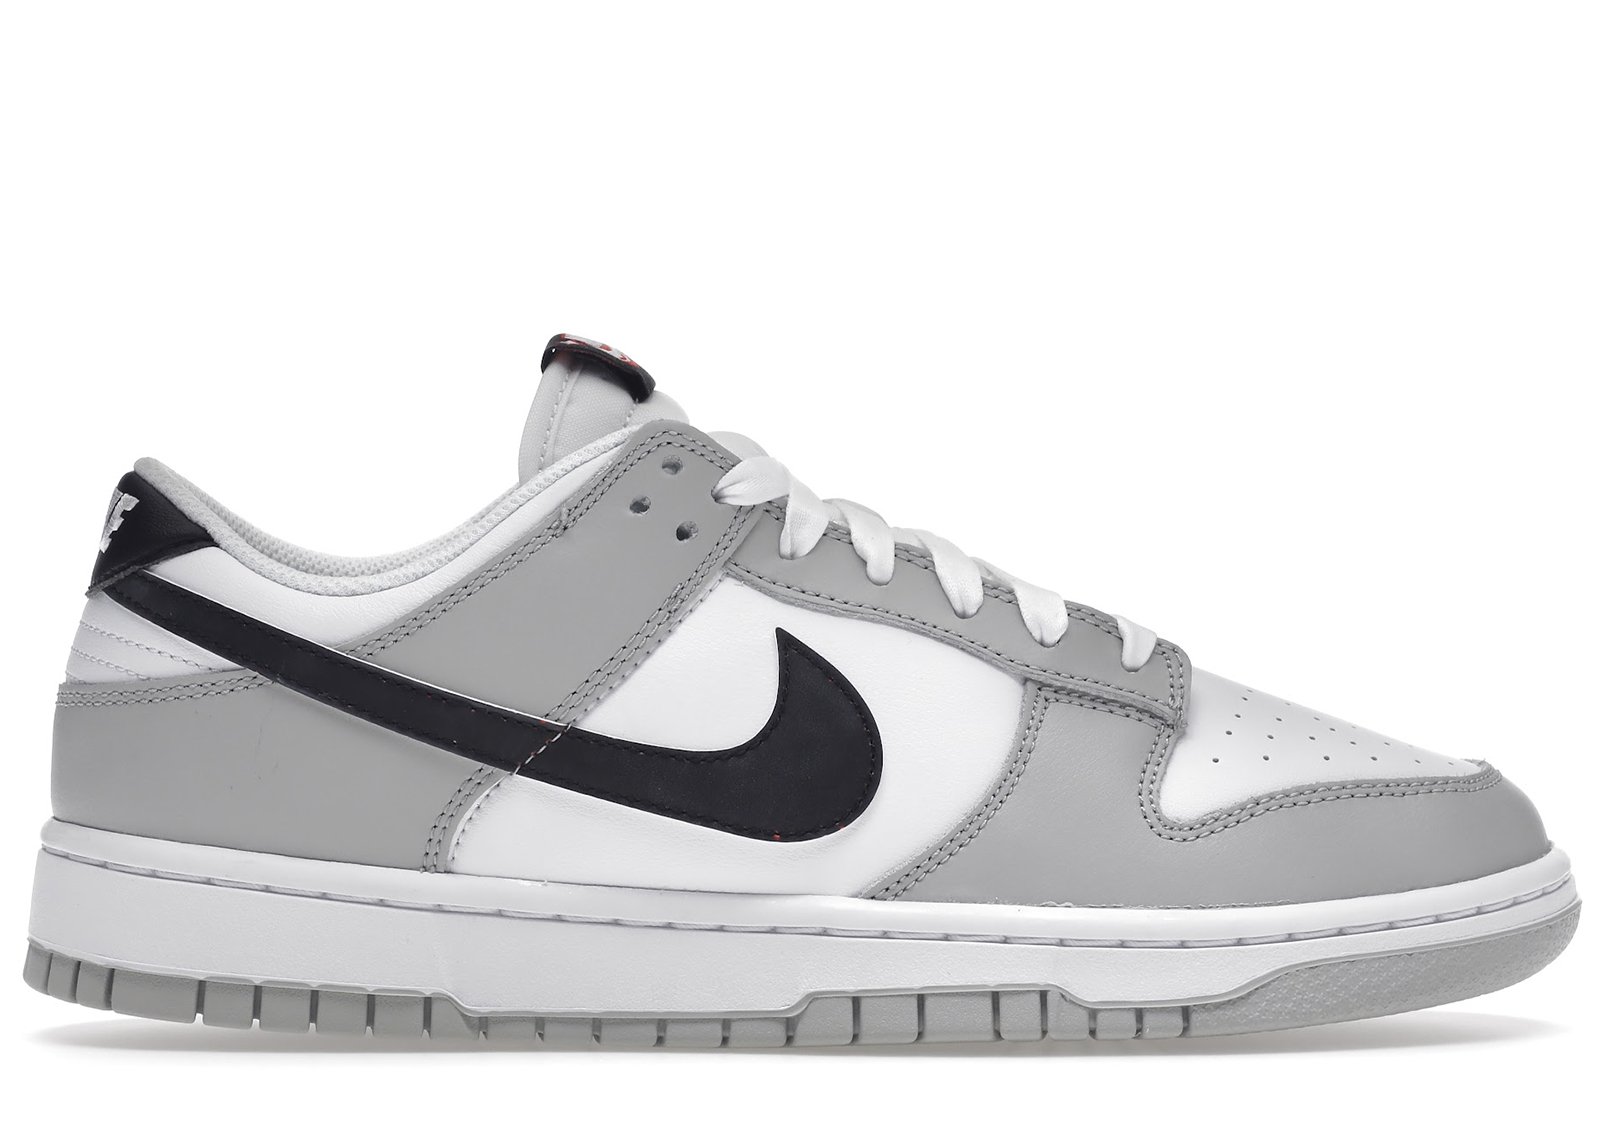 Nike Dunk Low SE Lottery Pack Grey Fog sneakers